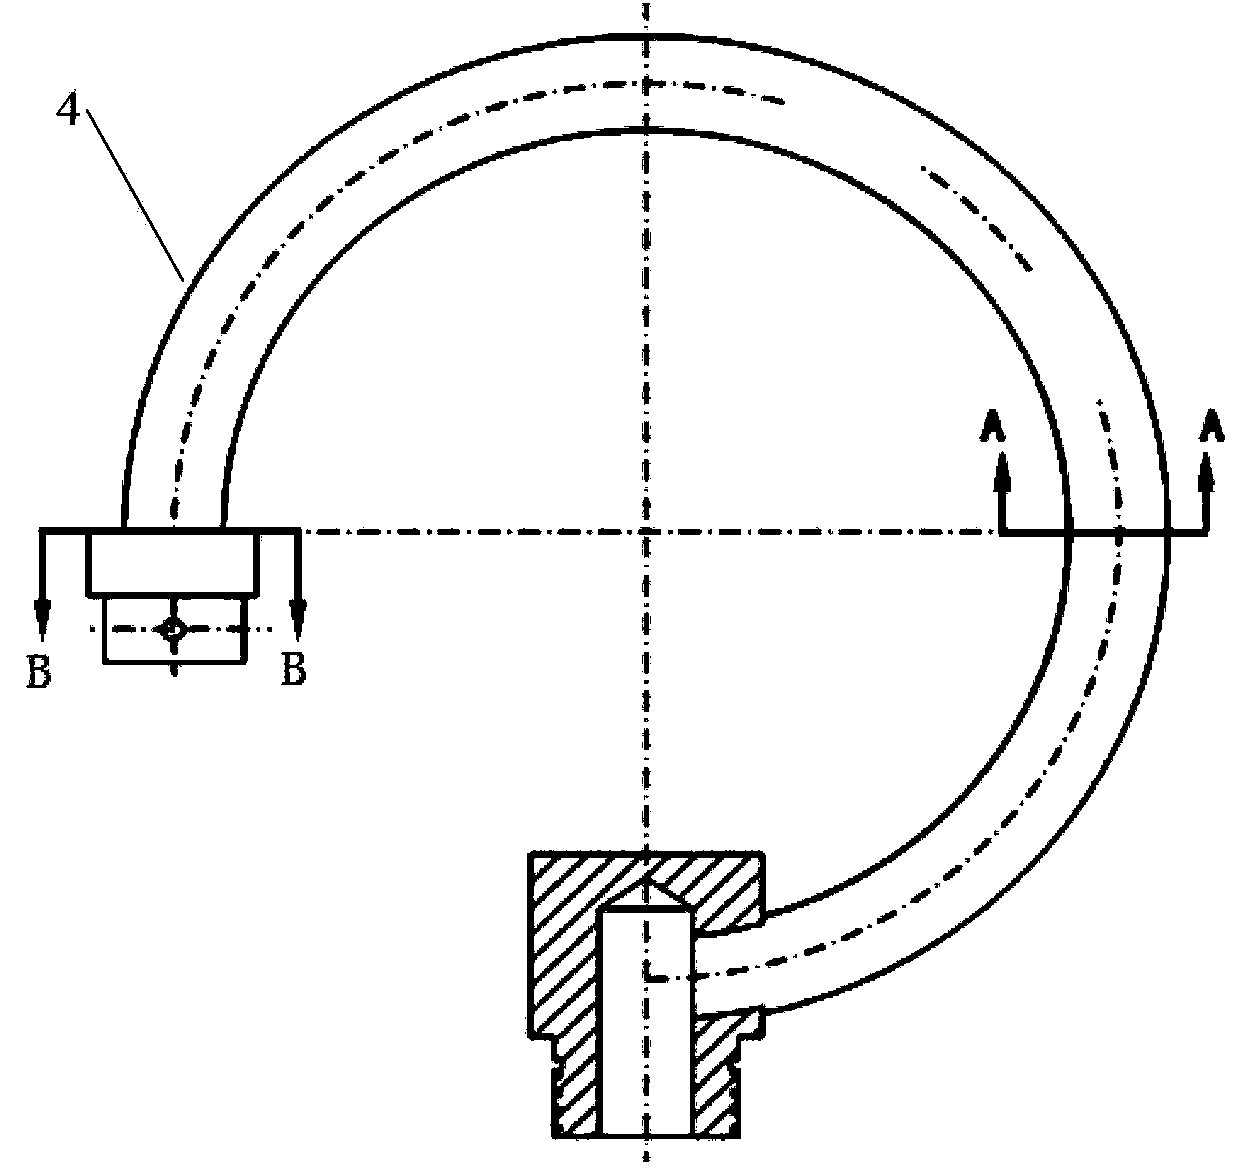 Active control mechanism for broadening lean burn flameout boundary of combustion chamber of heavy duty gas turbine